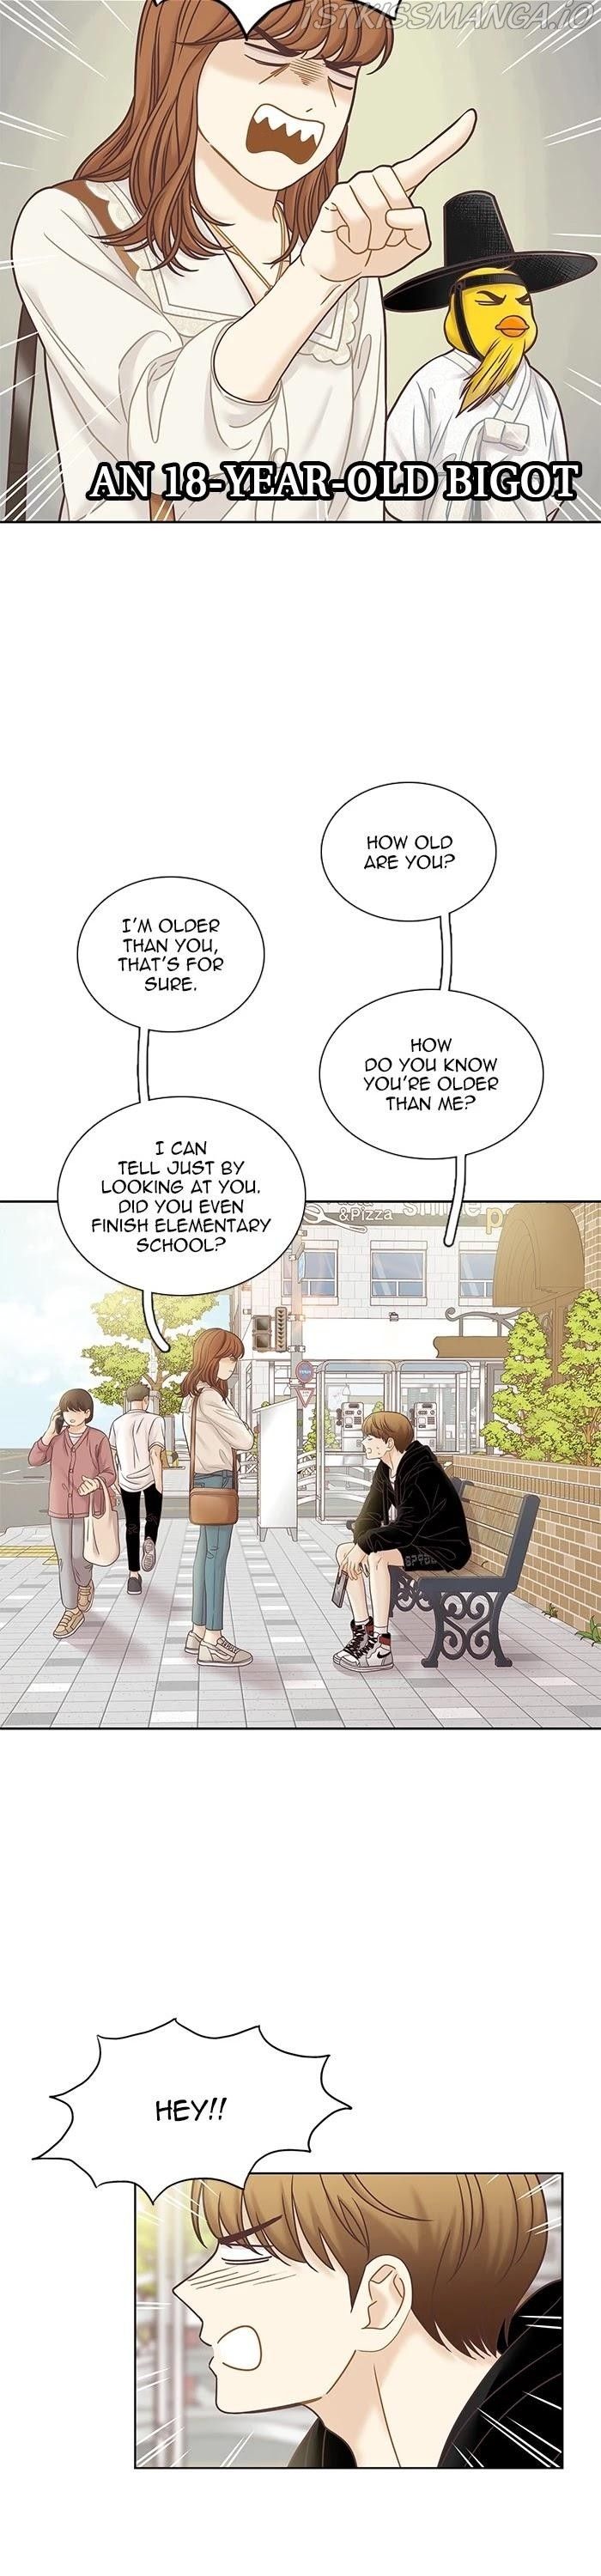 Girl’s World ( World of Girl ) Chapter 280 - Page 13